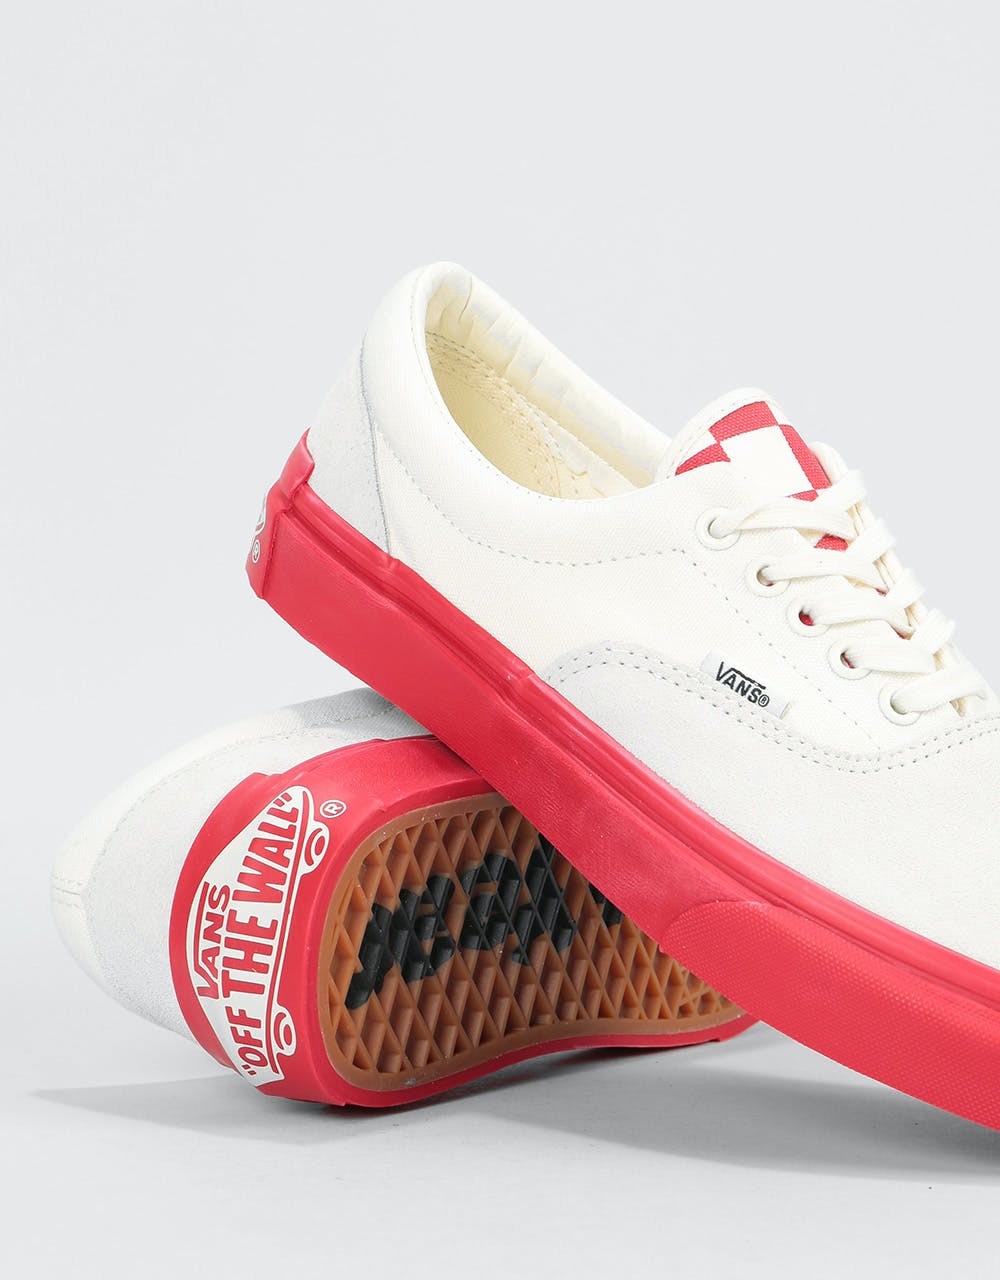 Vans Era Skate Shoes - (Y.O.P.Purlicue) Marshmallow/Racing Red